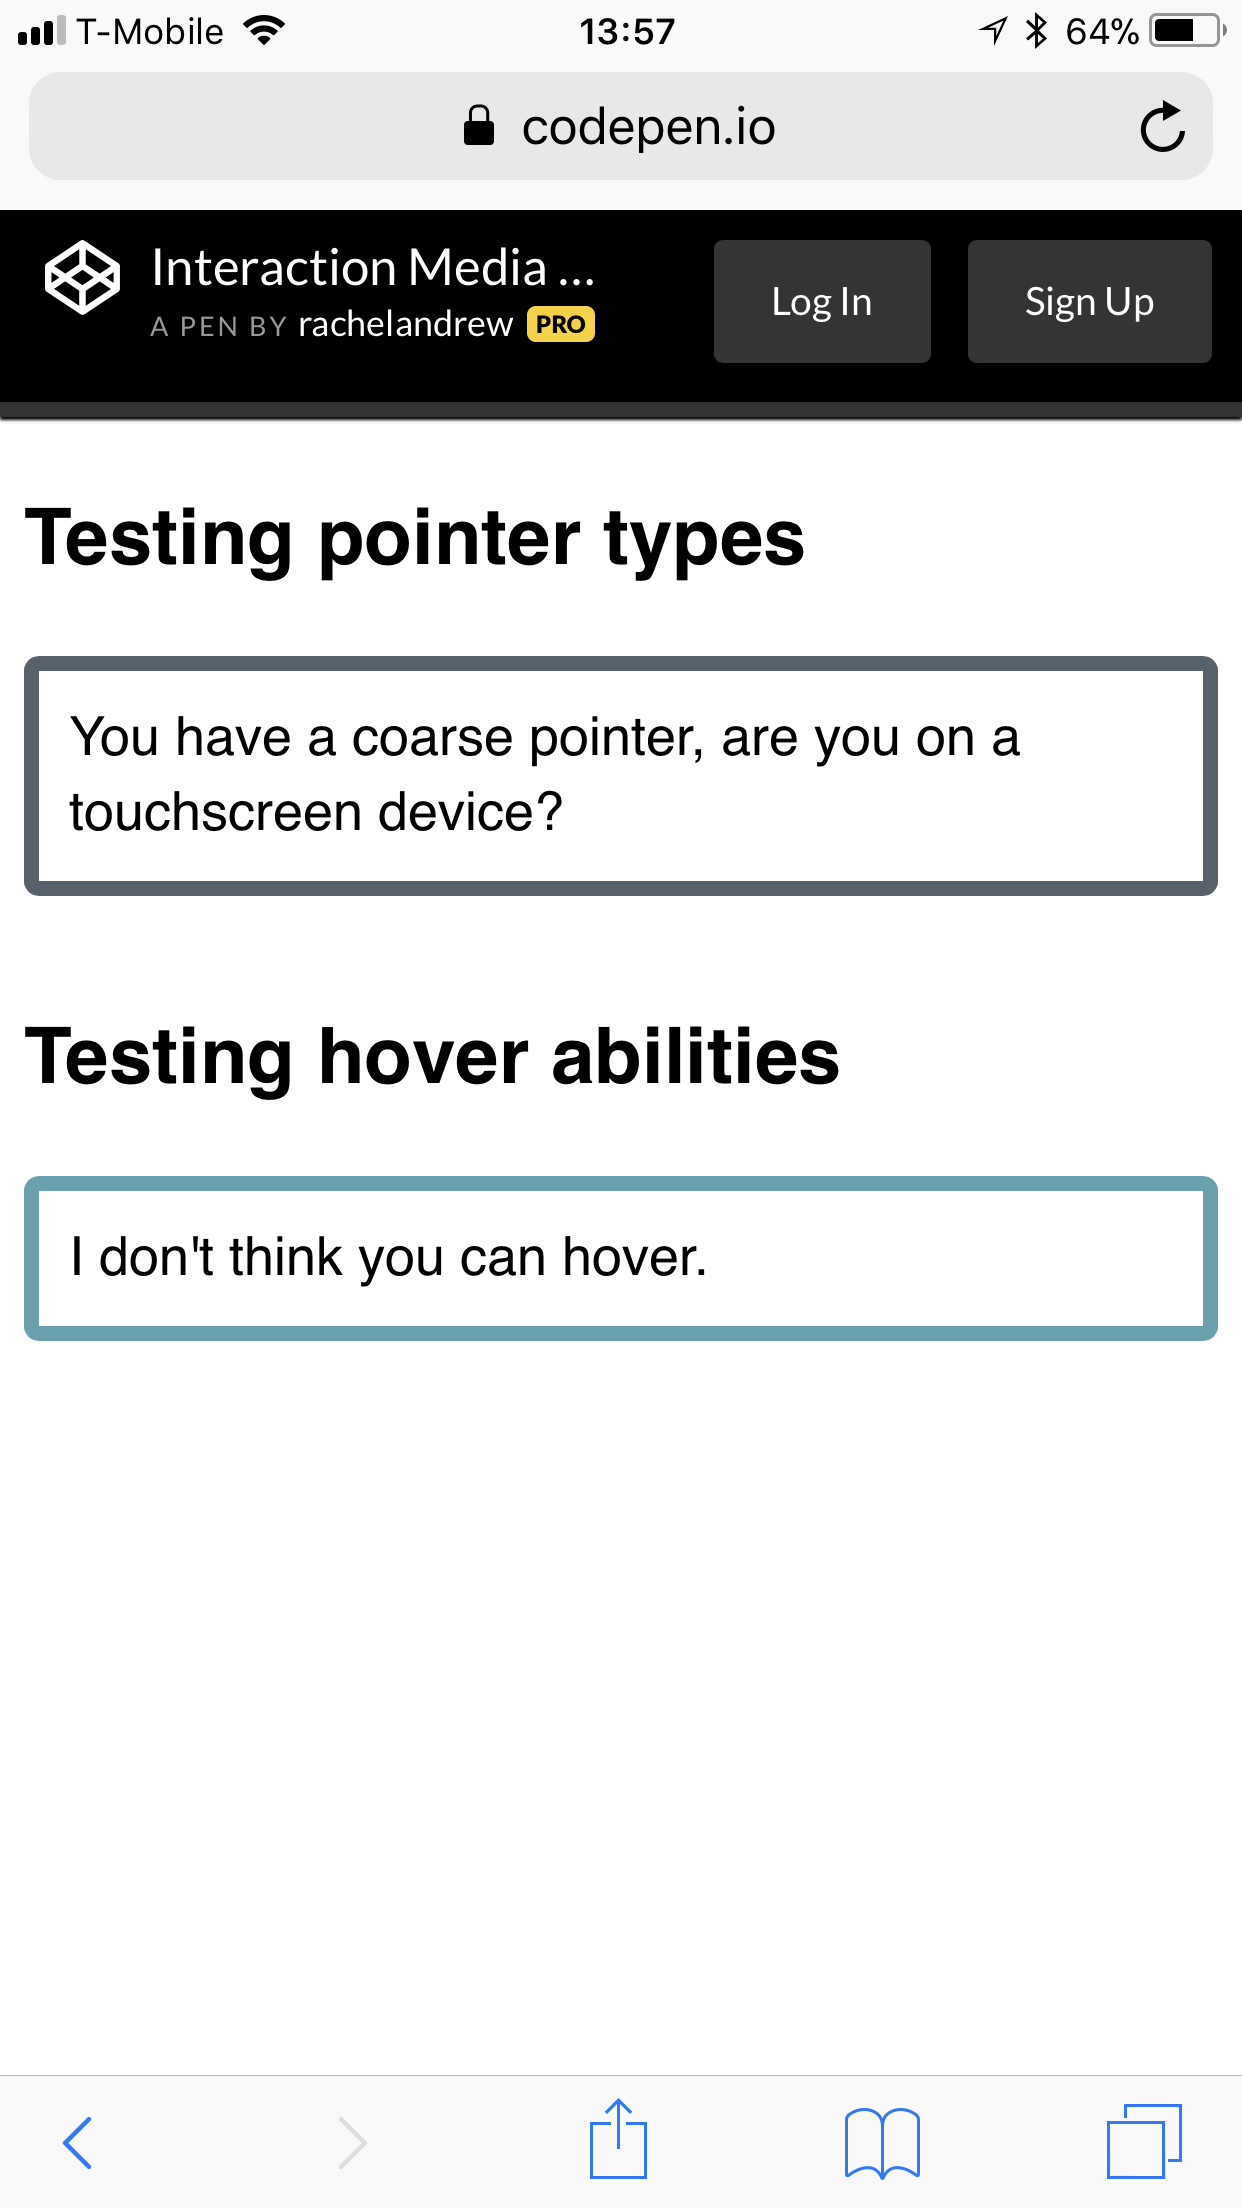 Phone screenshot indicating the user has a coarse pointer and cannot hover